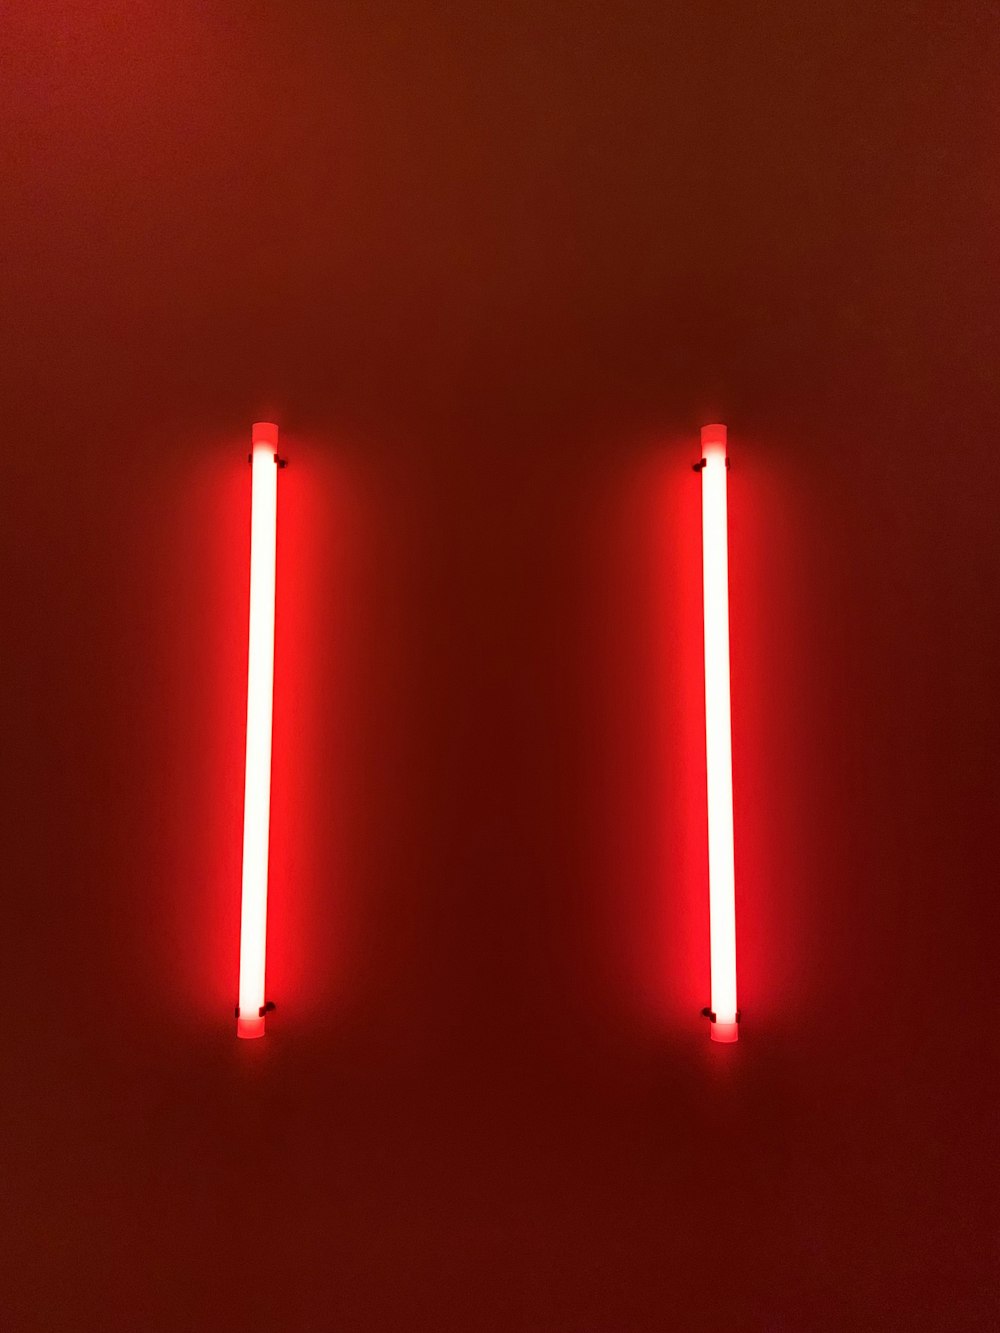 two red lights on a wall in a room